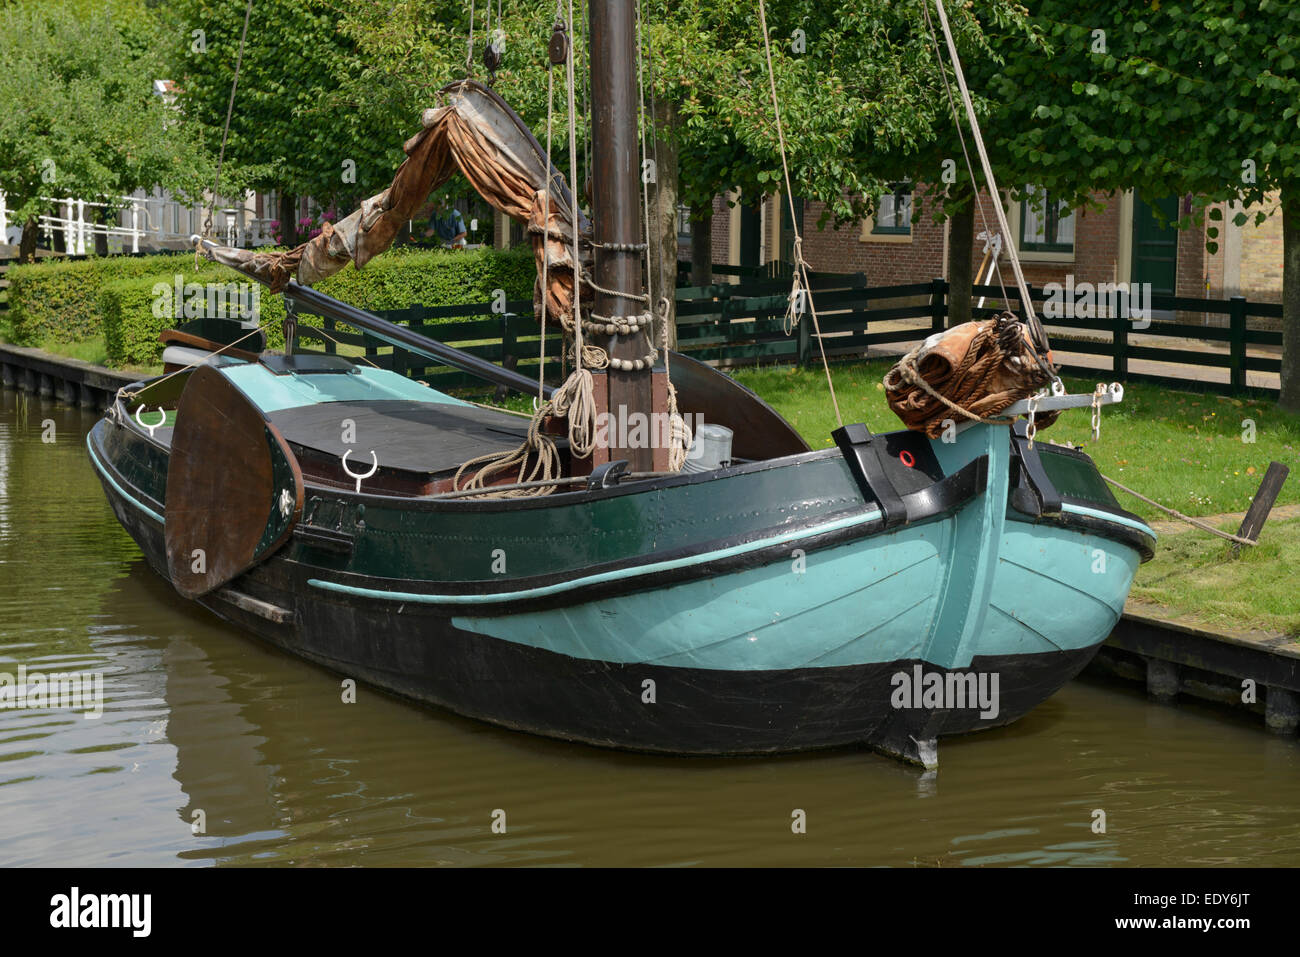 Traditional sailing boat, Zuiderzee open air museum, Lake Ijssel, Enkhuizen, North Holland, Netherlands, Europe Stock Photo